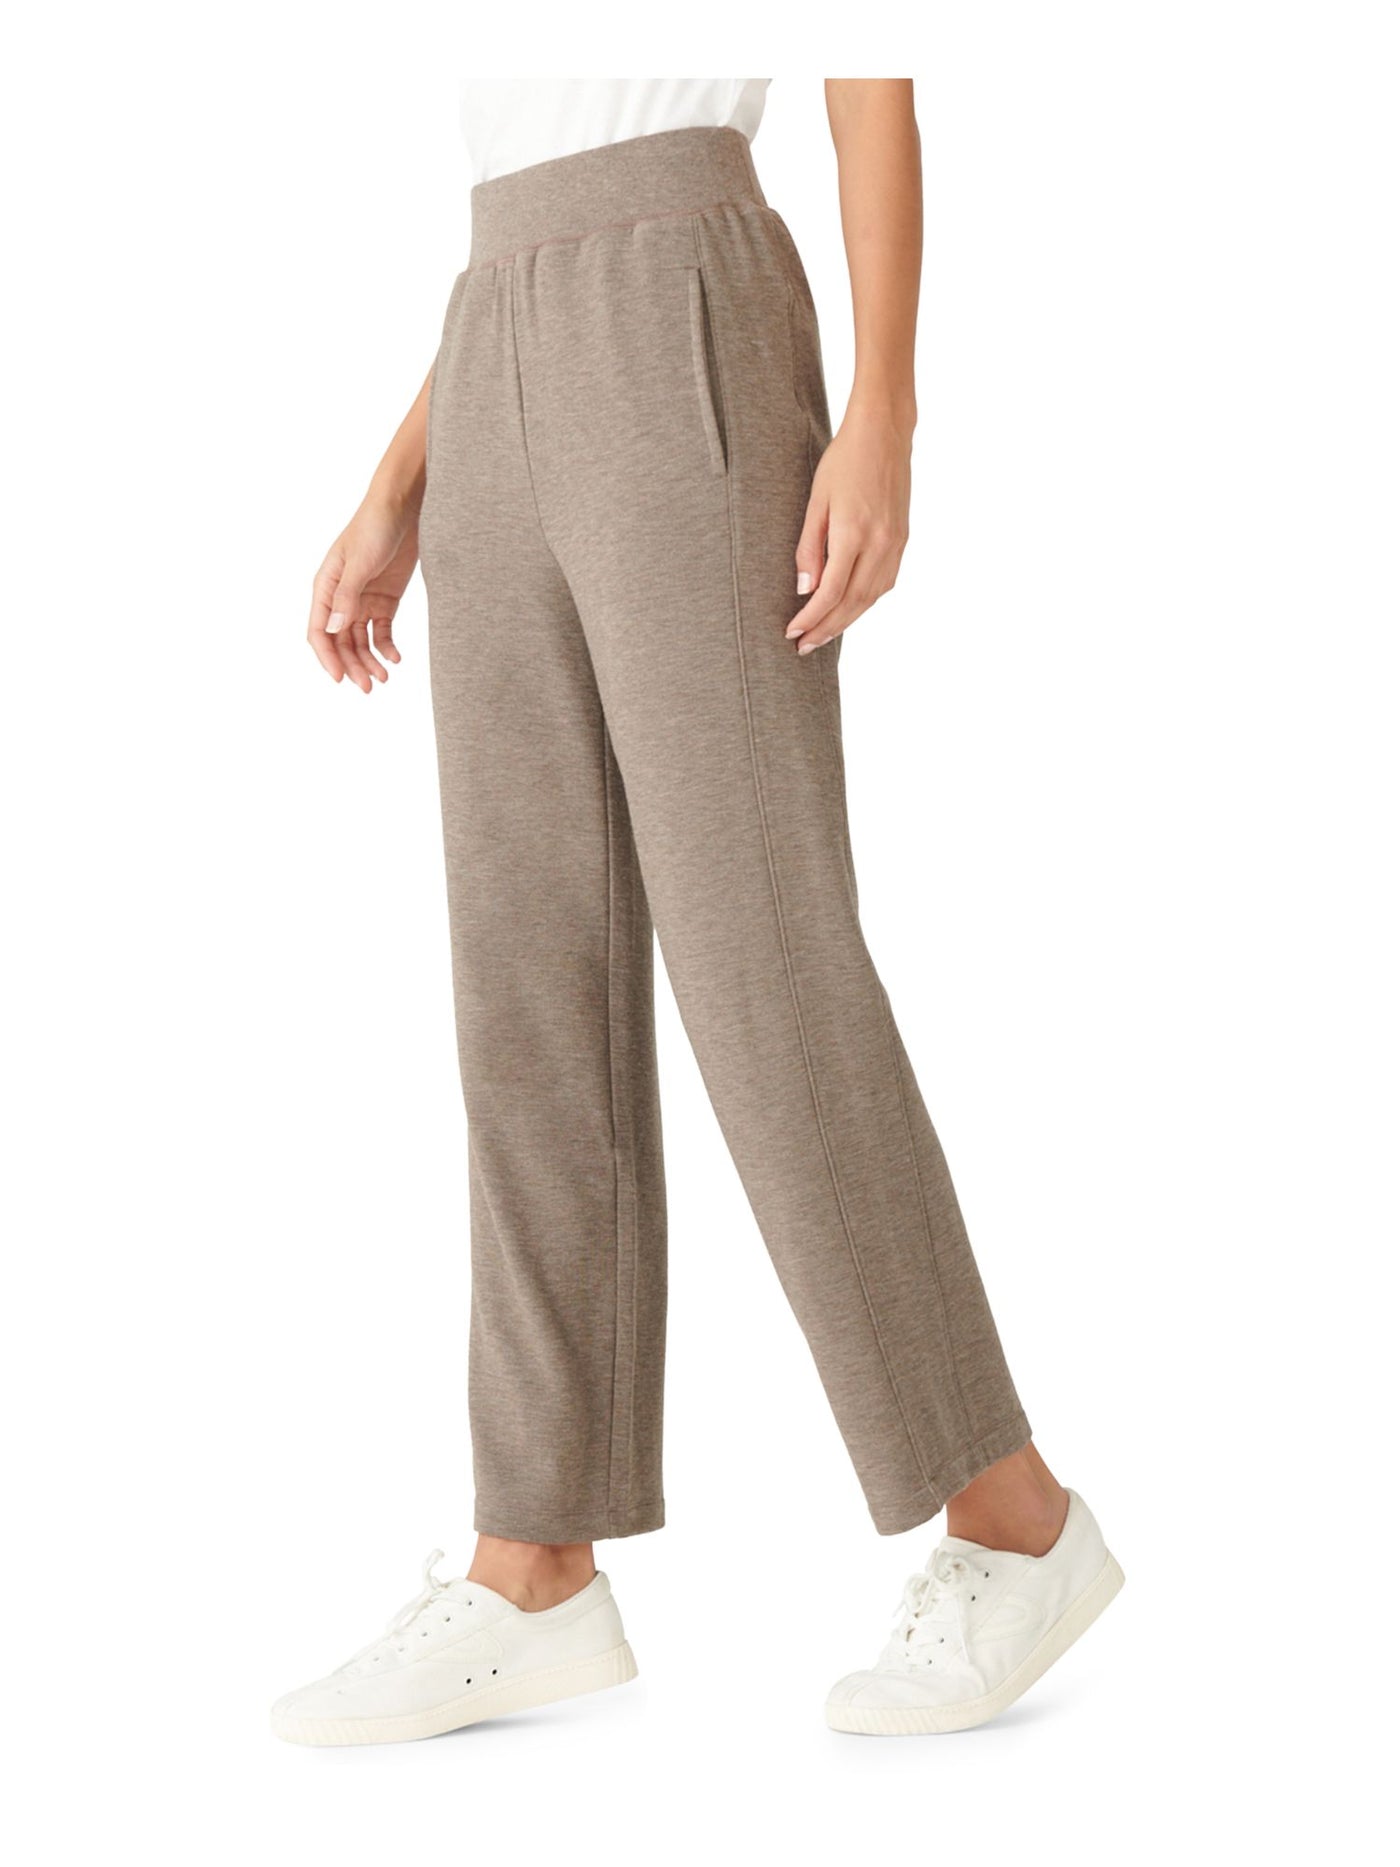 LUCKY BRAND Womens Brown Pocketed Pull-on Sweatpants Heather Cropped Pants S